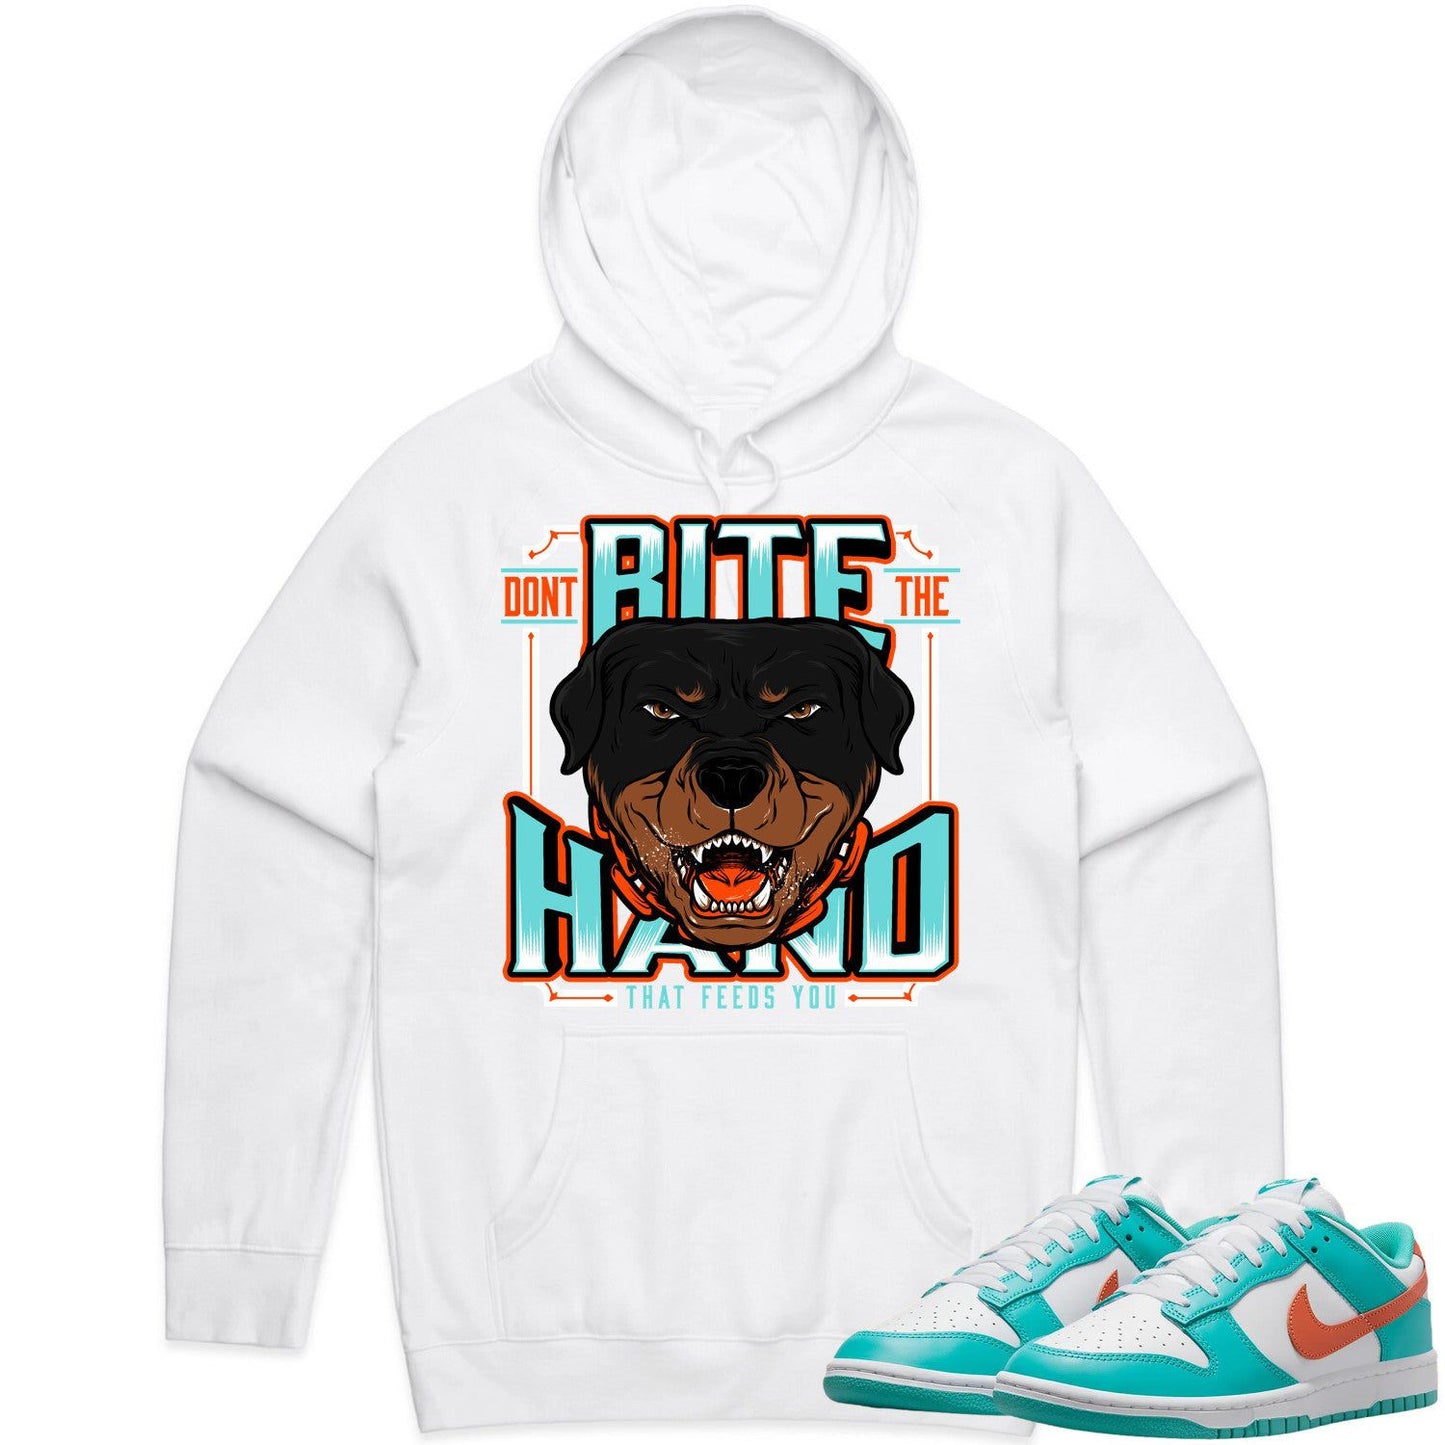 Miami Dunks Hoodie - Dolphins Dunks Hoodies - Miami Dont Bite